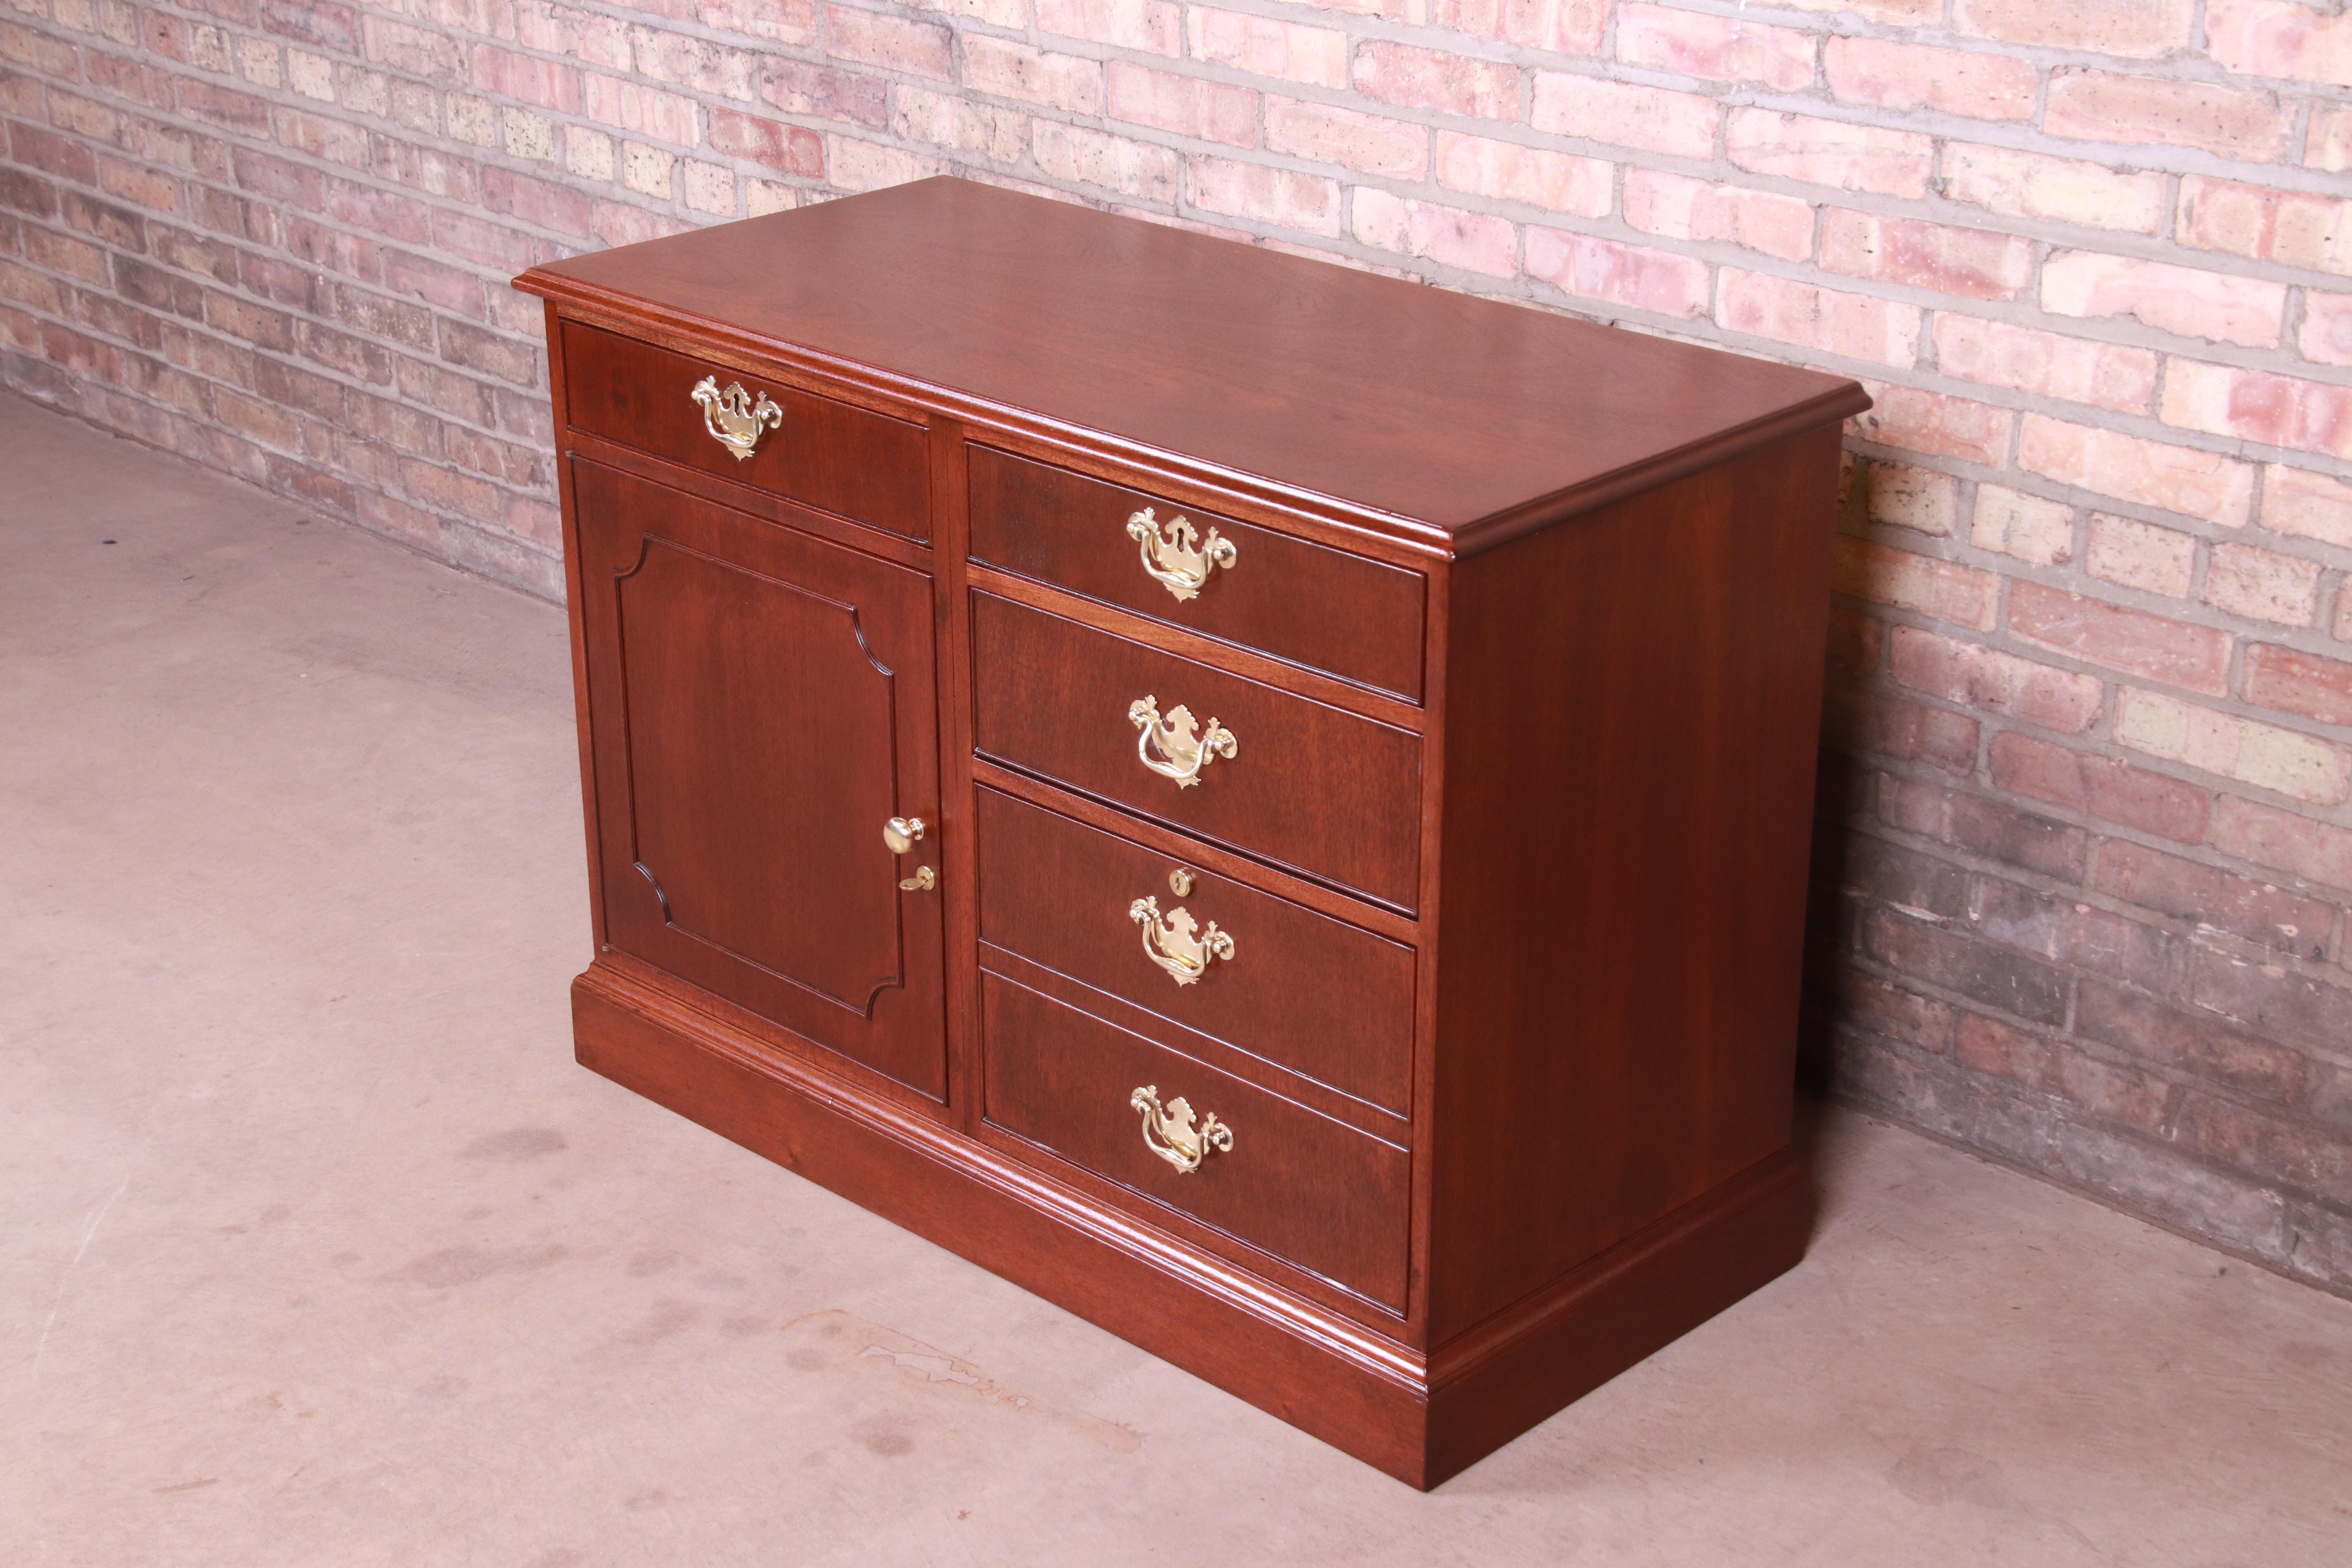 20th Century Kittinger American Chippendale Mahogany Credenza or Bar Cabinet, Refinished For Sale